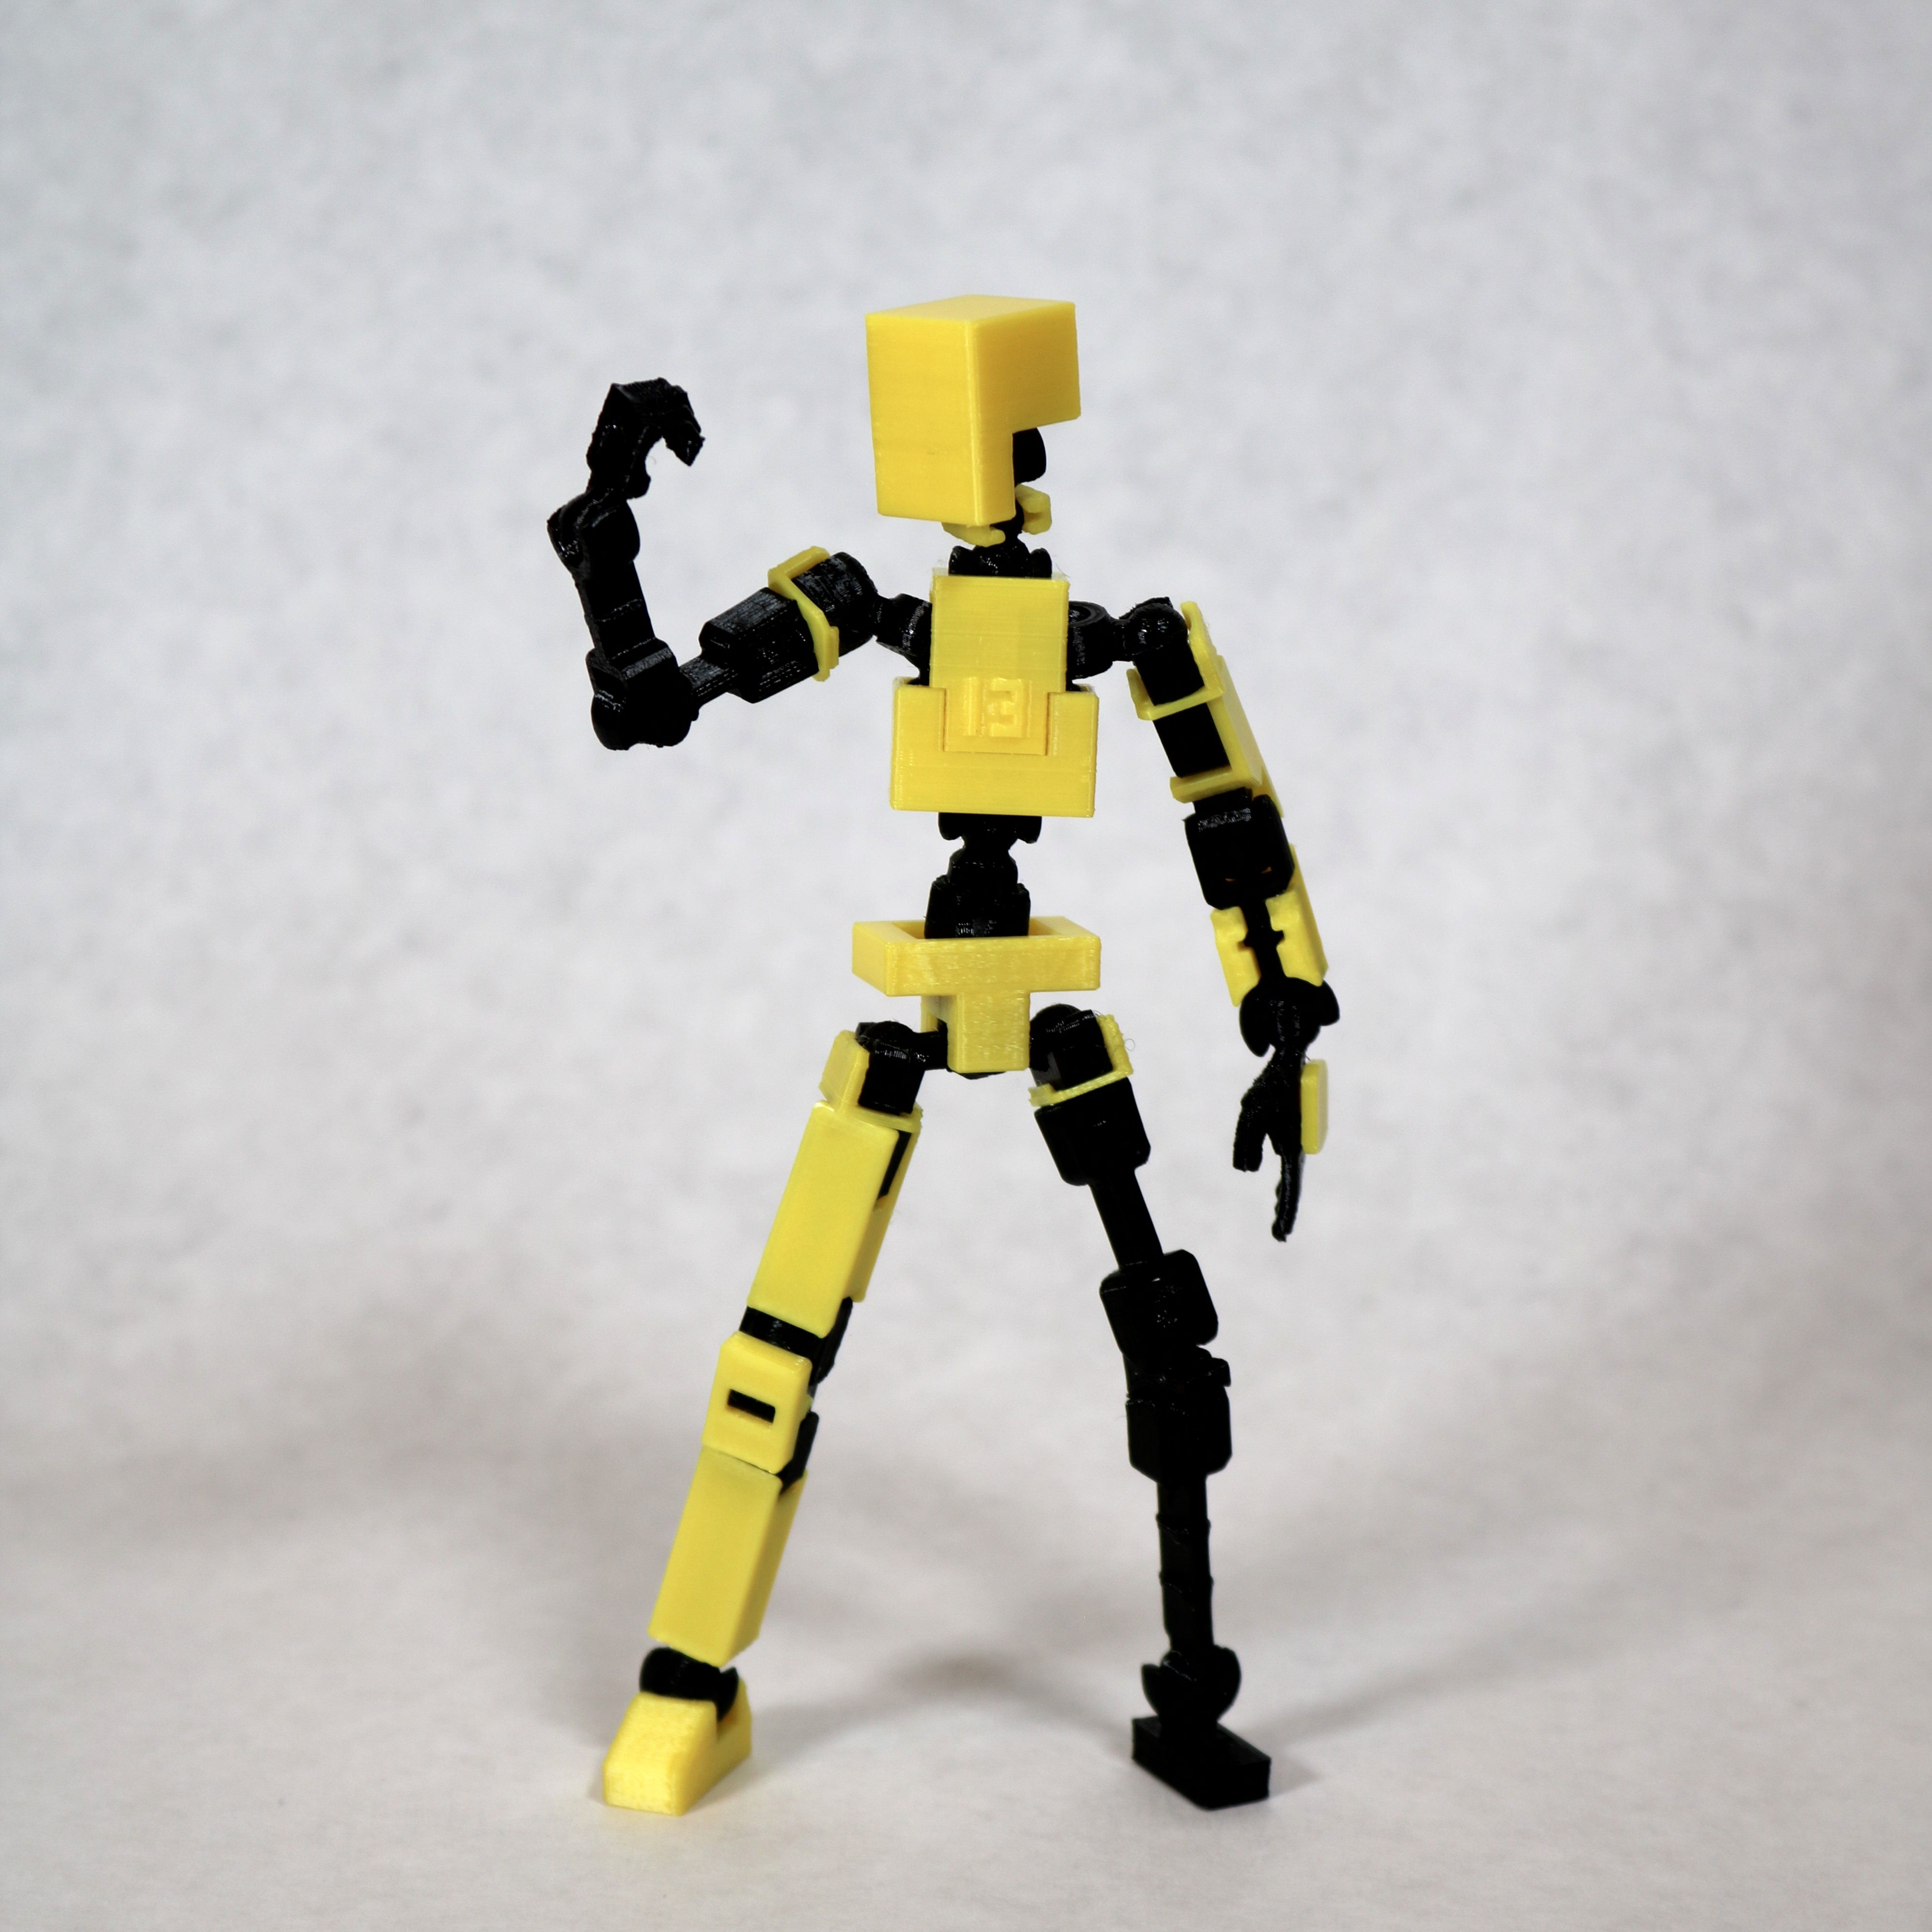 LUCKY 13 Printable Jointed Figure by soozafone | Download free STL ...